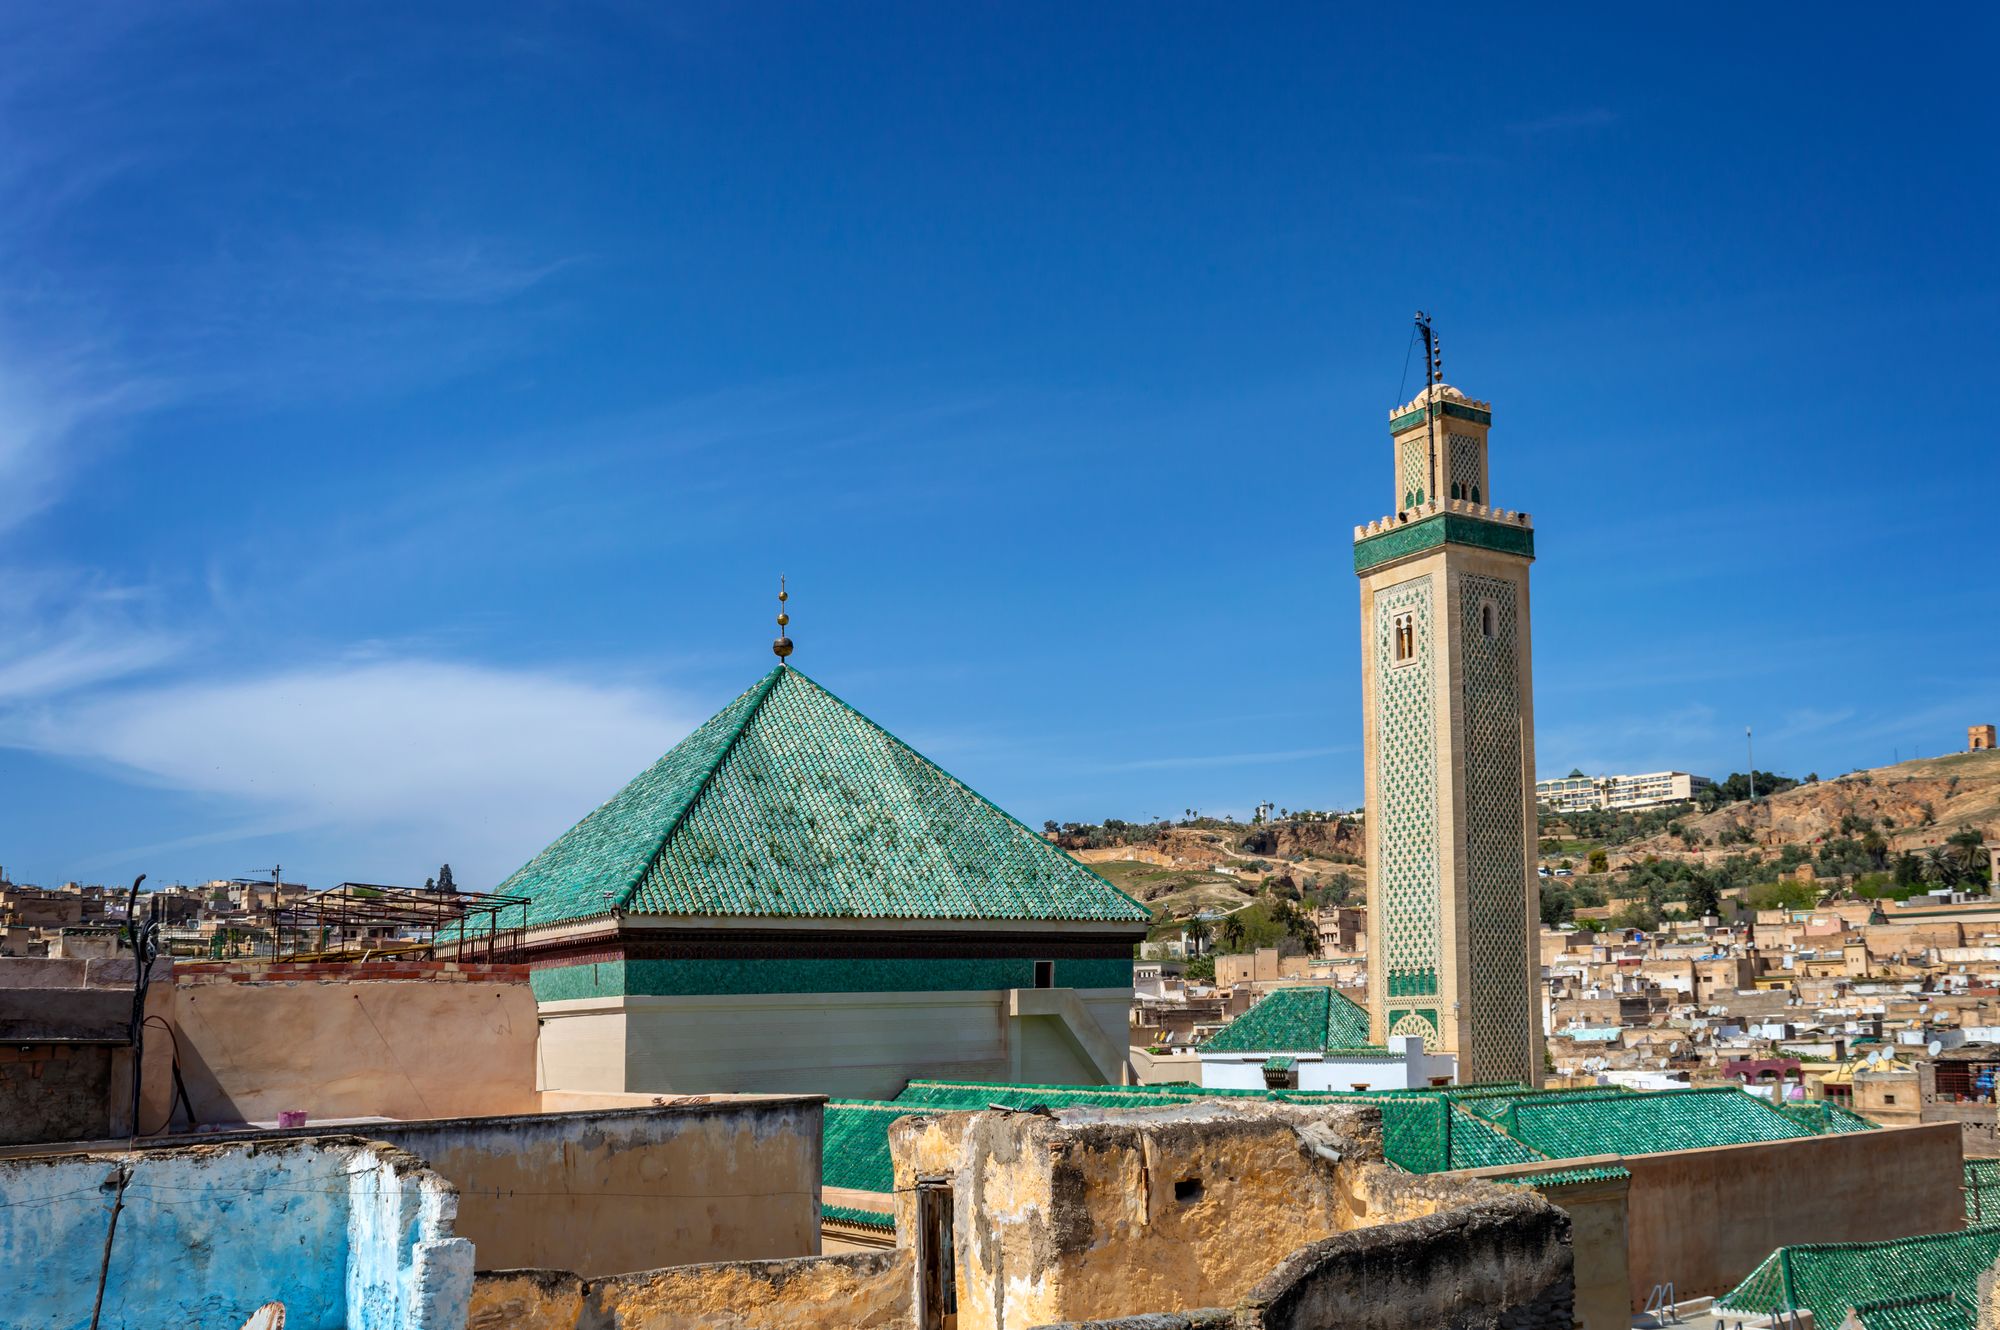 Aerial view of the green roof and minaret of al-Qarawiyyin Mosque in Fes